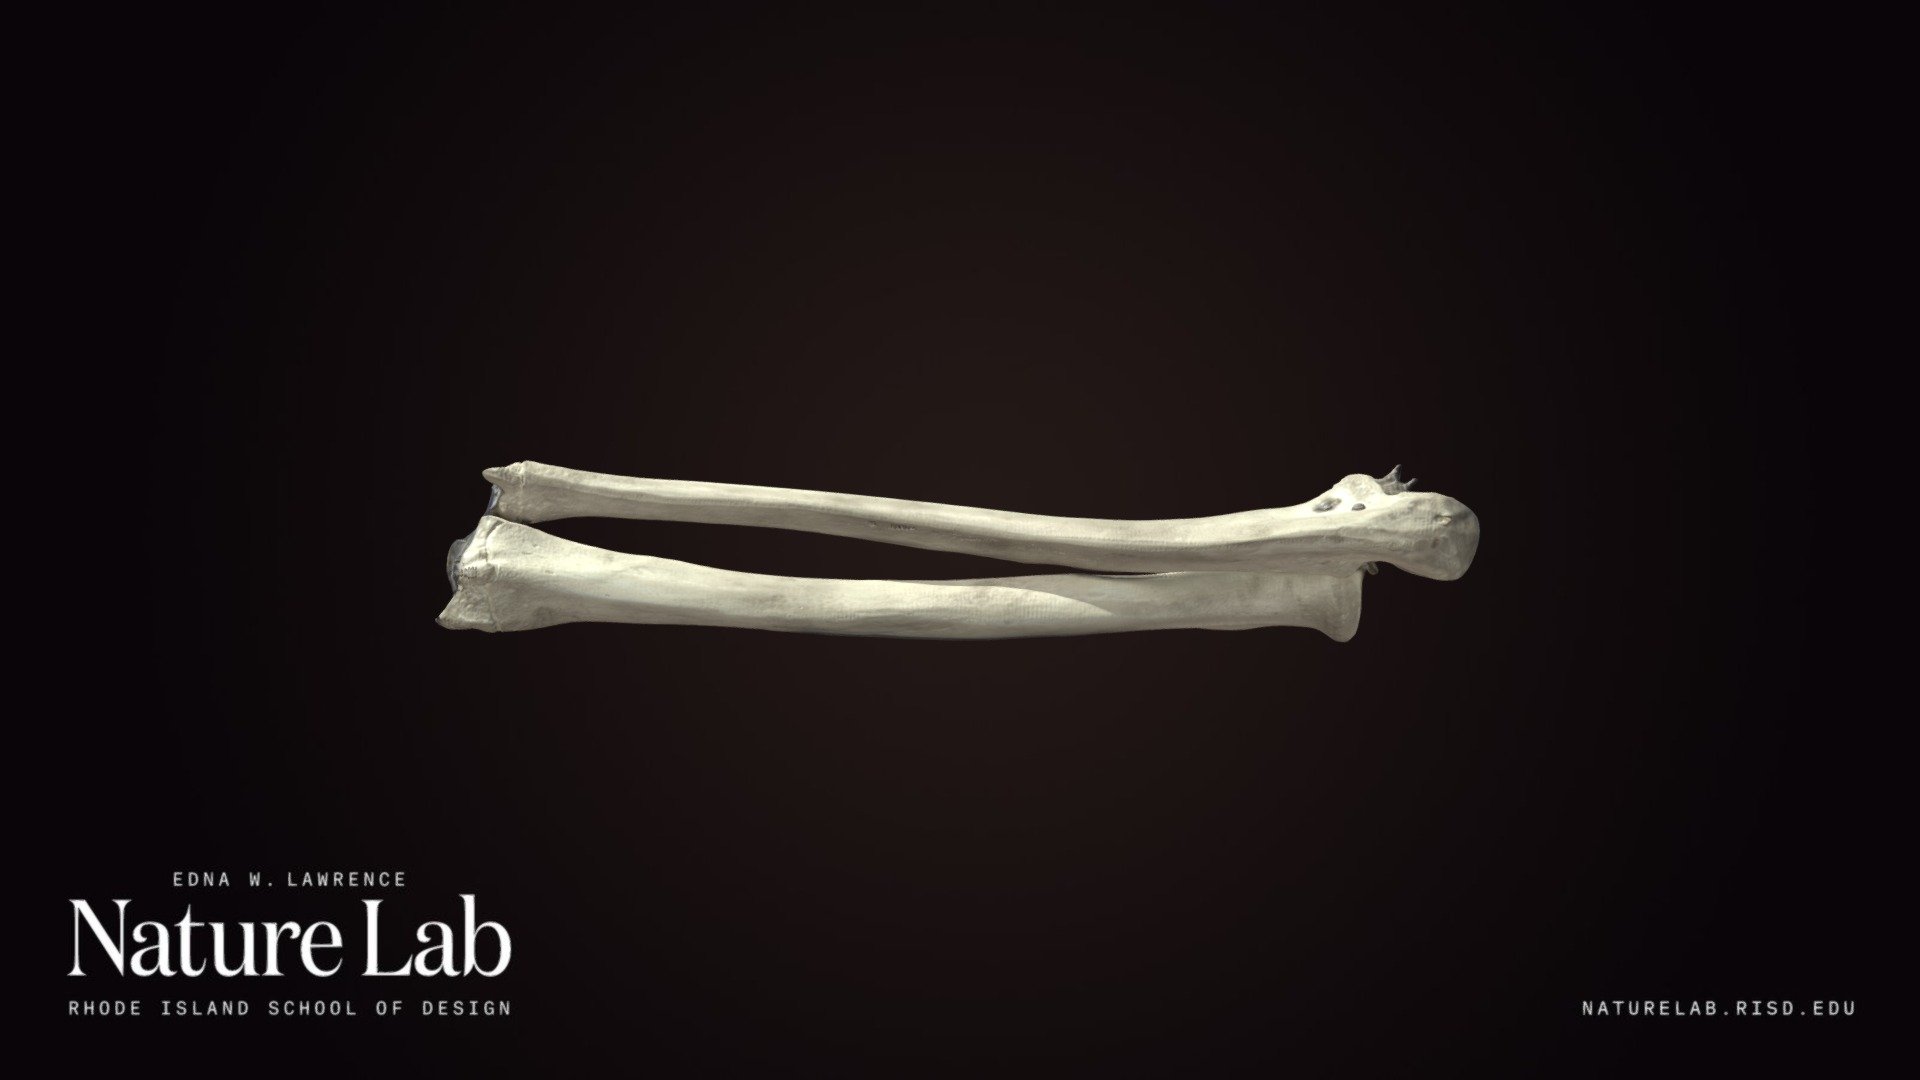 3D scan of human skeleton replica. Right side, forearm/ lower arm bones - ulna and radius. 

&ldquo;The forearm is the region of the upper limb between the elbow and the wrist. The term forearm is used in anatomy to distinguish it from the arm, a word which is most often used to describe the entire appendage of the upper limb, but which in anatomy, technically, means only the region of the upper arm, whereas the lower &ldquo;arm